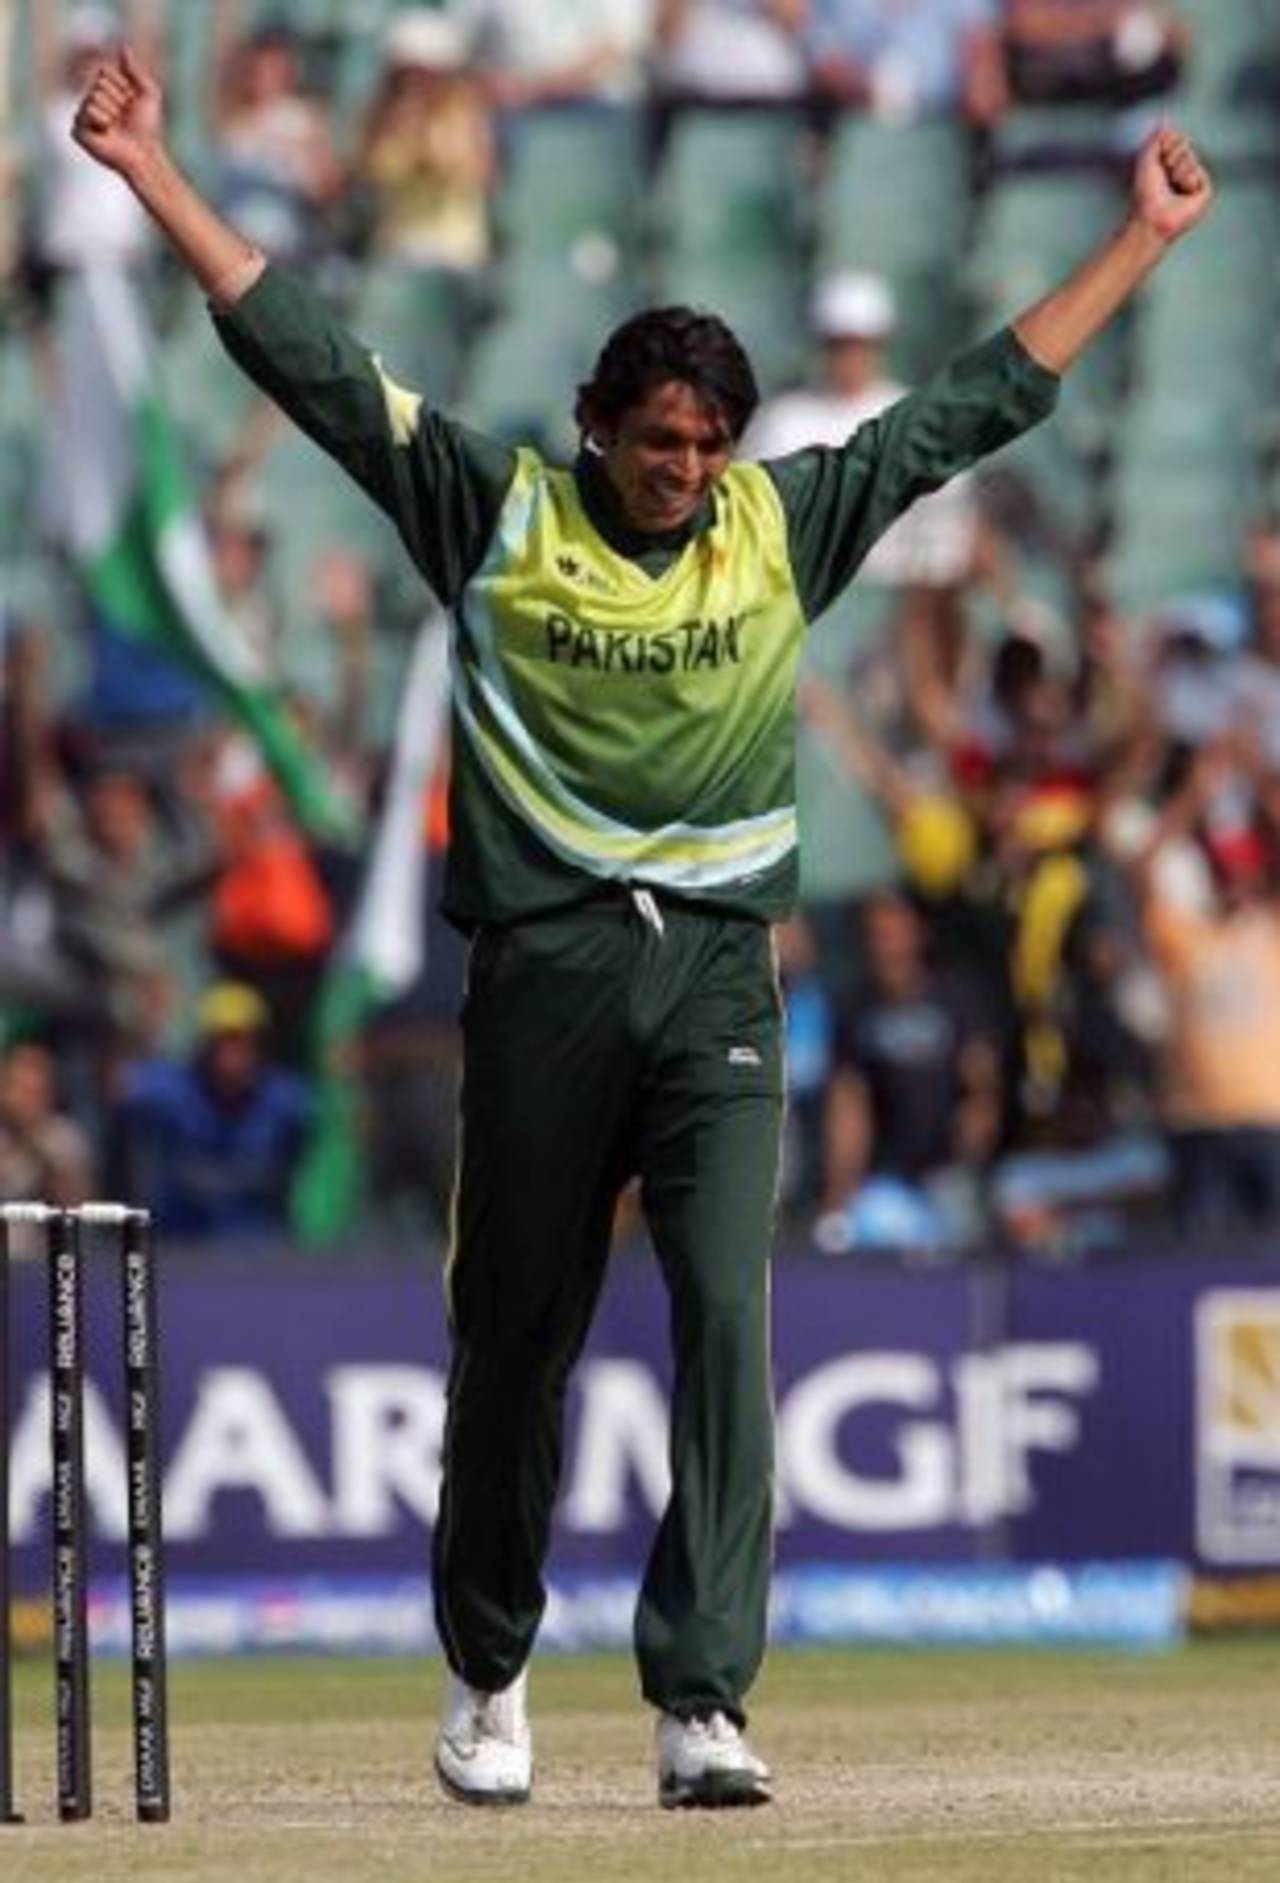 Mohammad Asif's ban expires on September 22, the same day the ICC Champions Trophy is scheduled to begin&nbsp;&nbsp;&bull;&nbsp;&nbsp;AFP